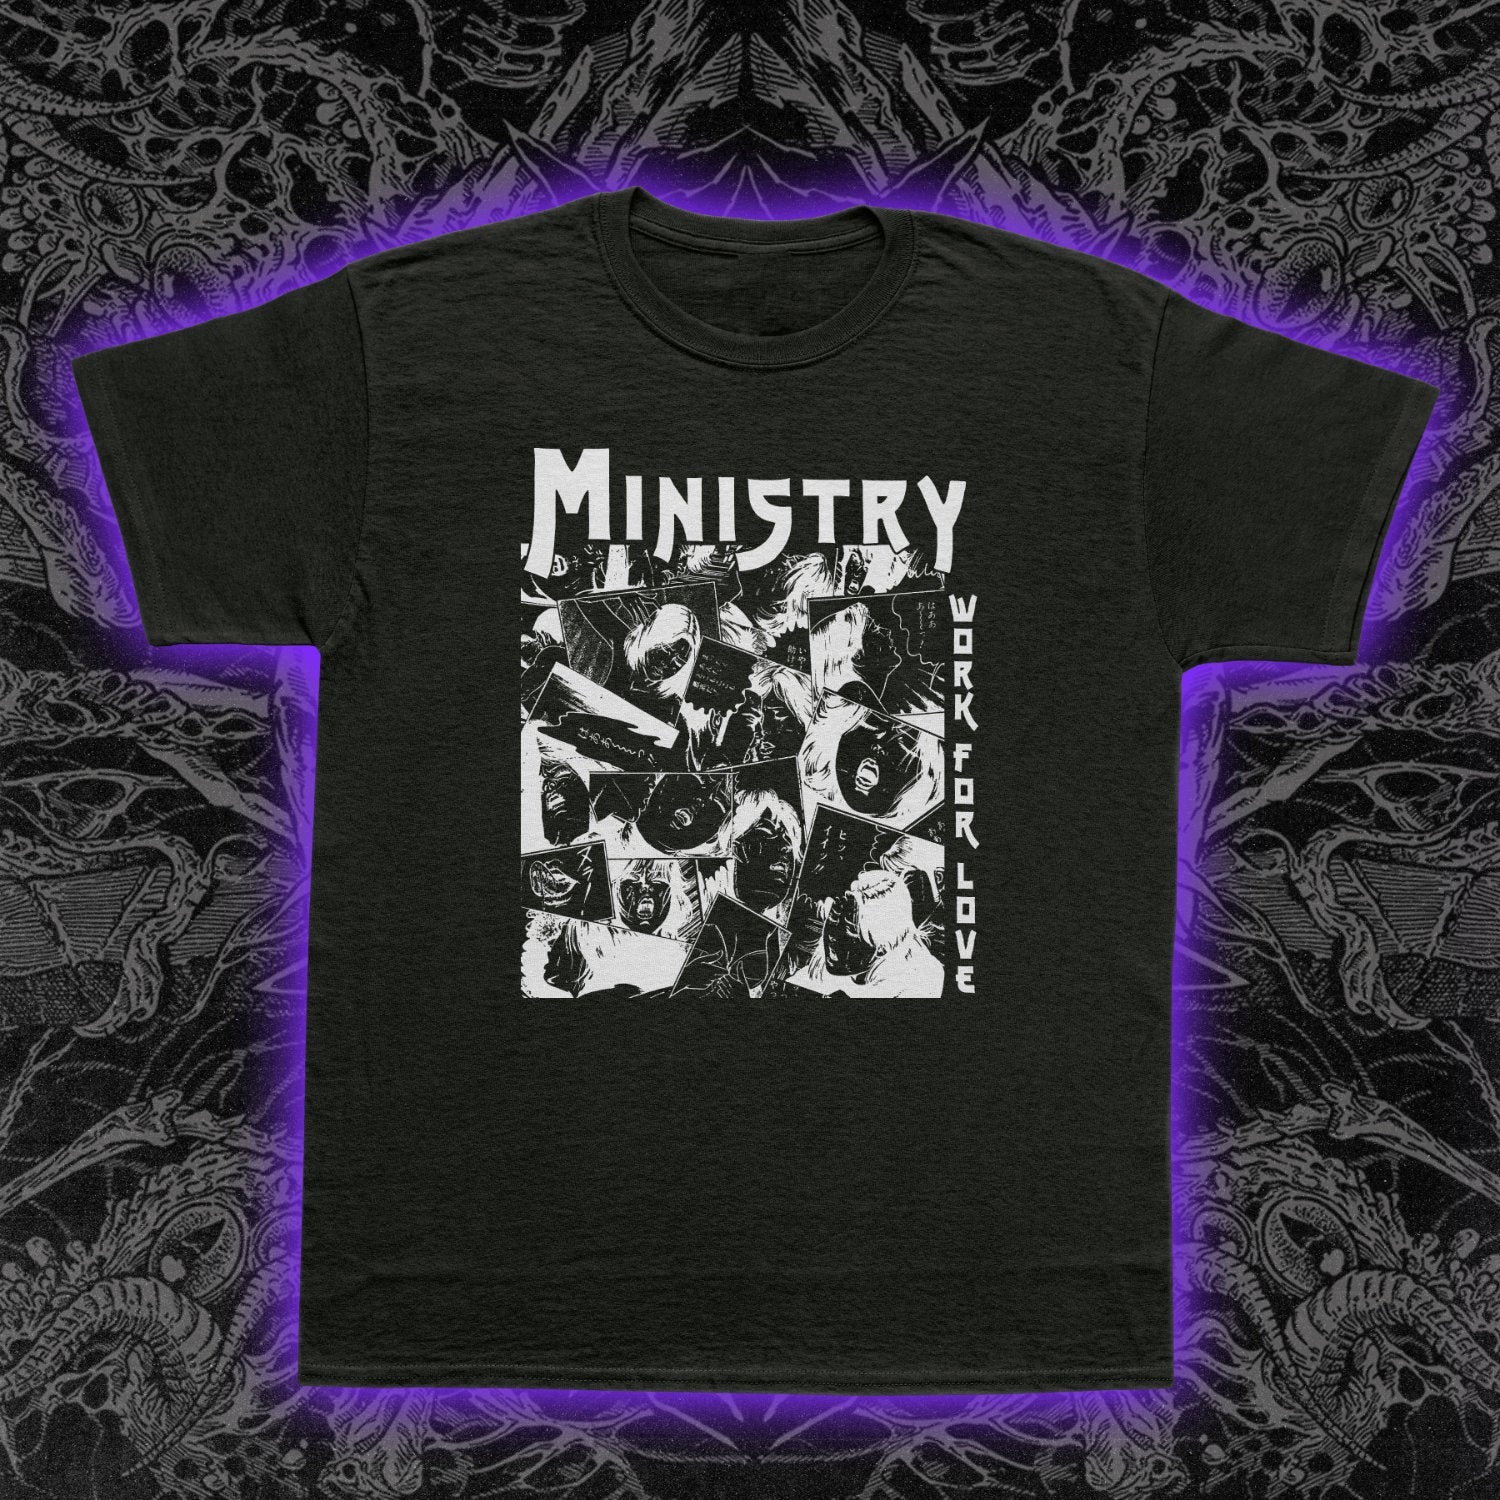 Ministry Work For Love Premium Tee